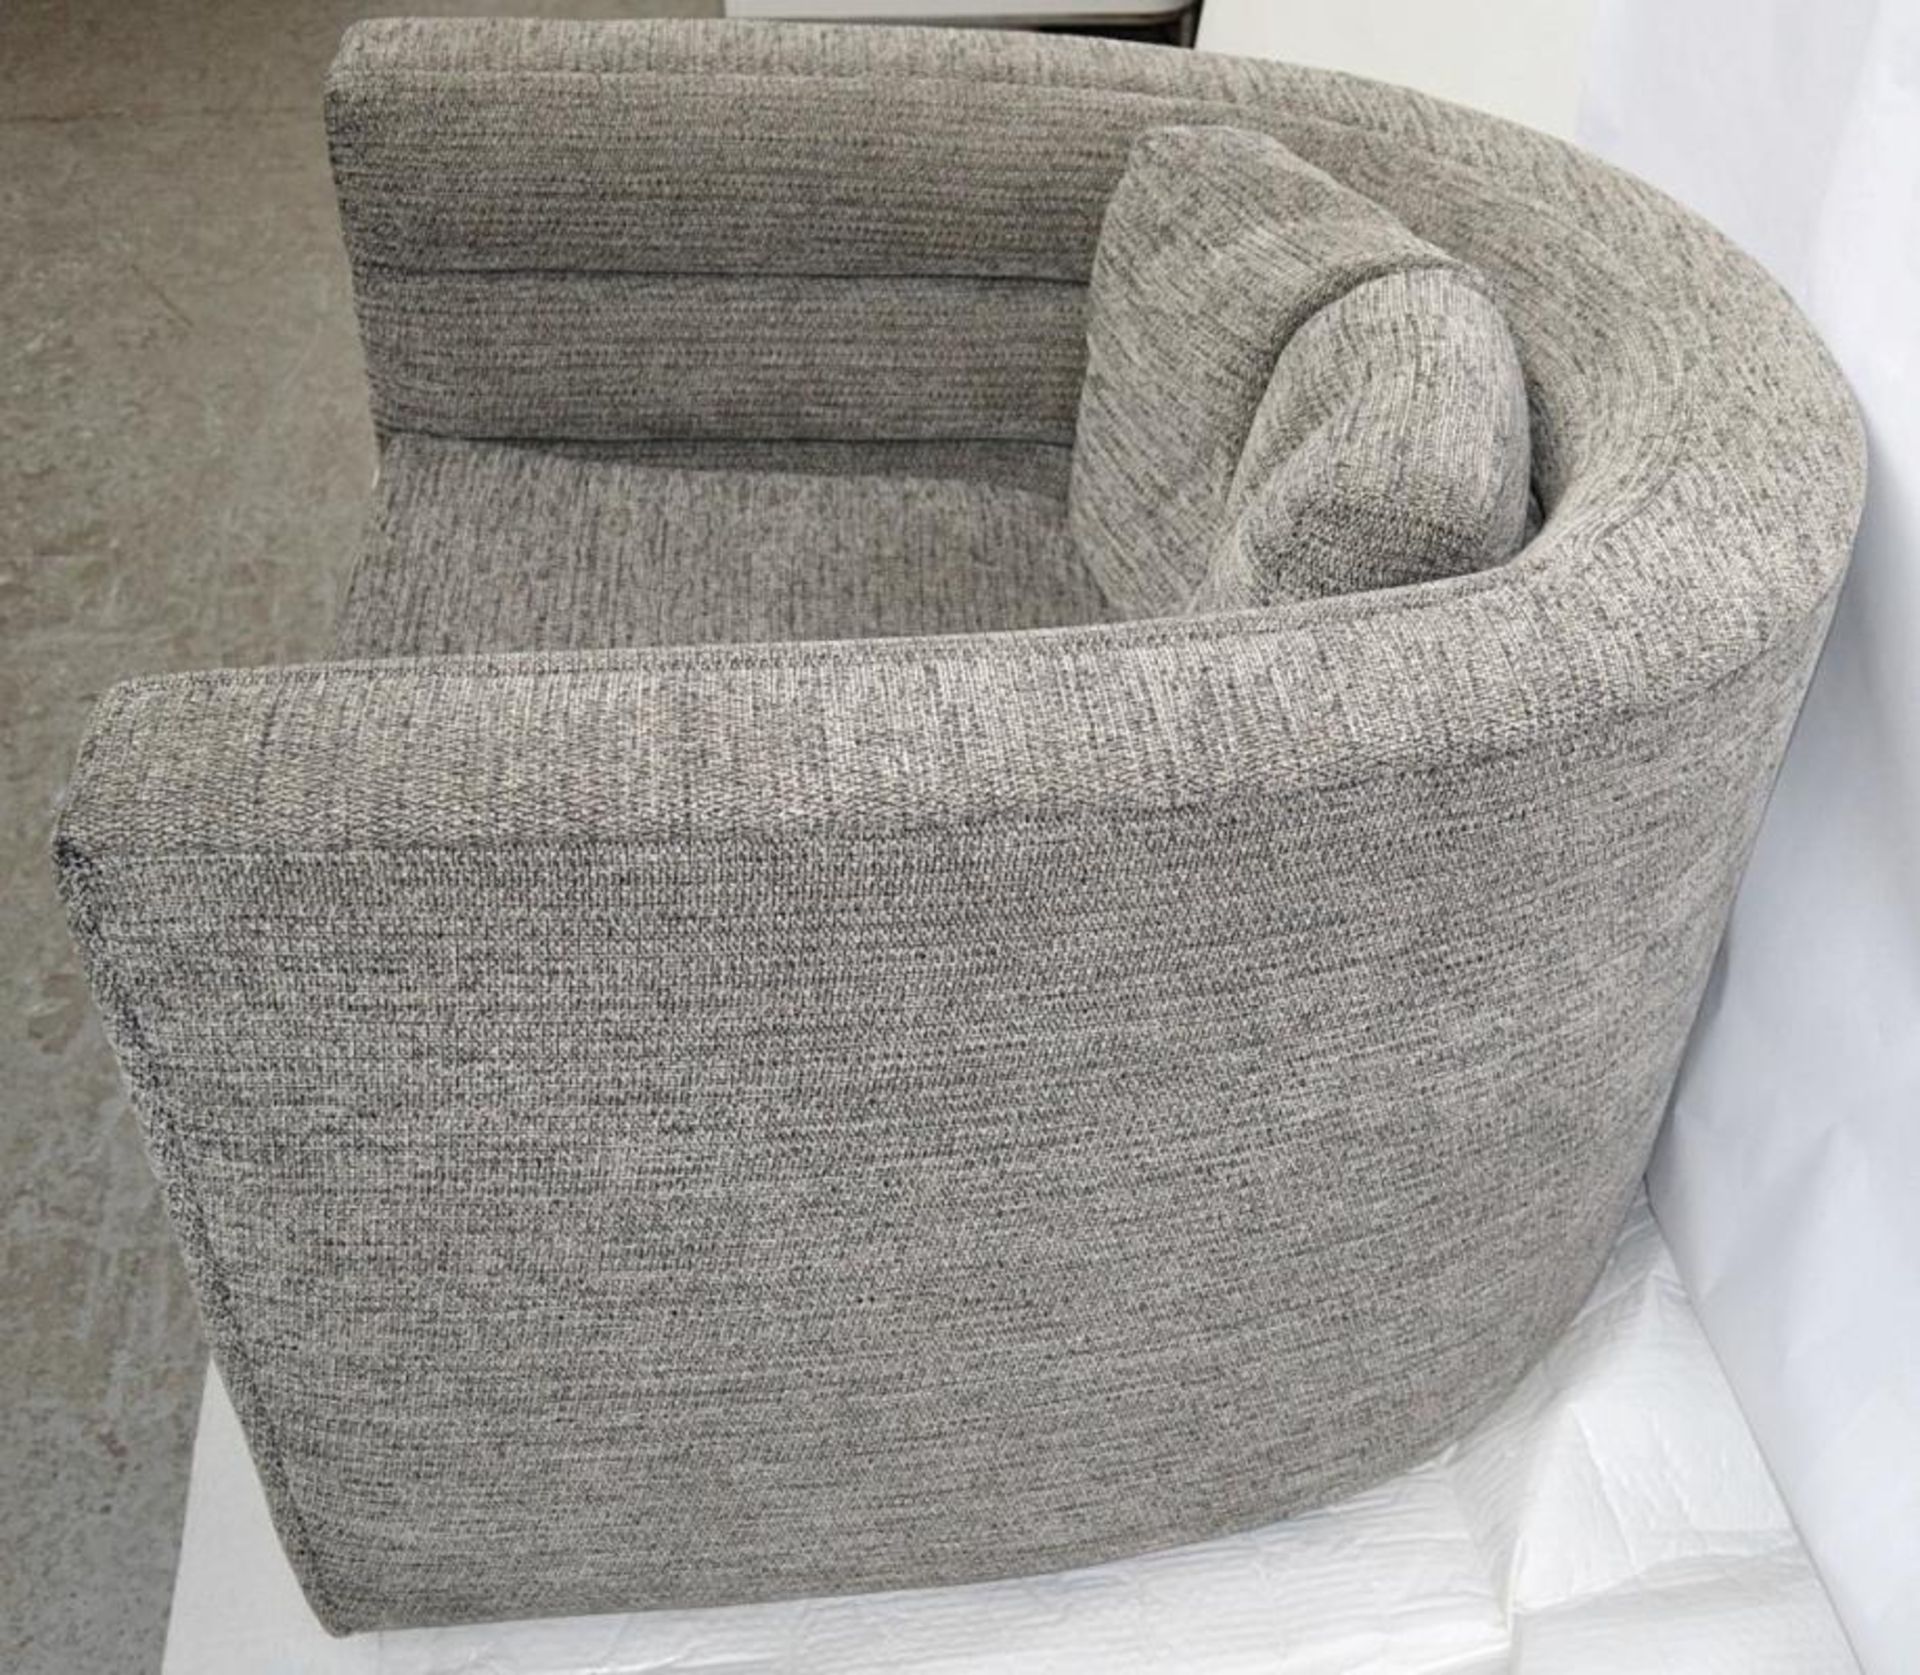 1 x KELLY WEARSTLER Melrose Club Chair In Grey - Dimensions: W36" x D38" x H28" - Ref: 5223289 - CL0 - Image 21 of 24